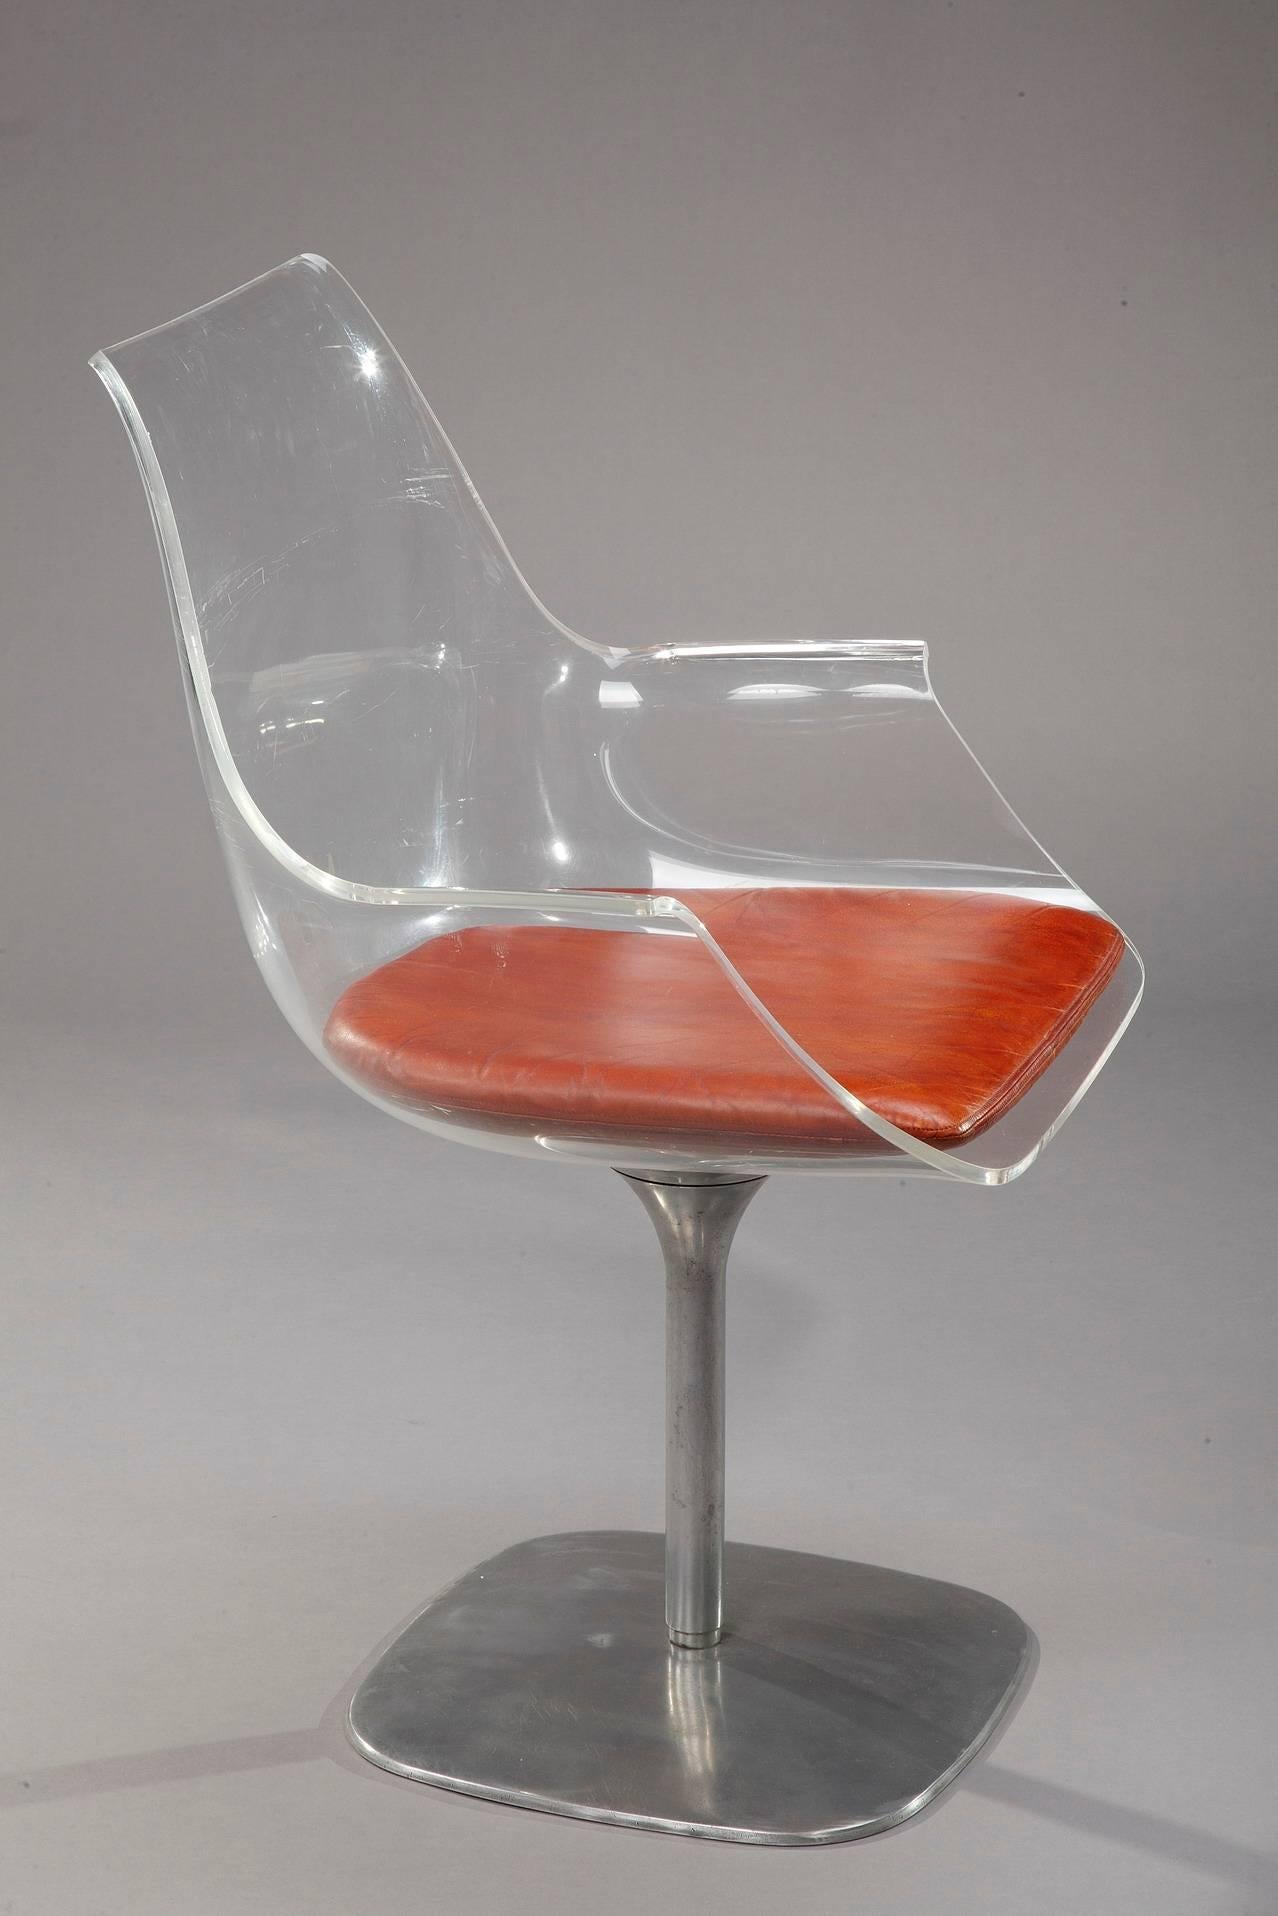 Swivel chair from the 1970s close to Estelle (USA, 1915-1997) and Erwin Laverne (1909-2003) 1957 Champagne chair. The seat in Lucite is resting on an aluminium rotating base, with original upholstery in brown-orange leather. 8 chairs